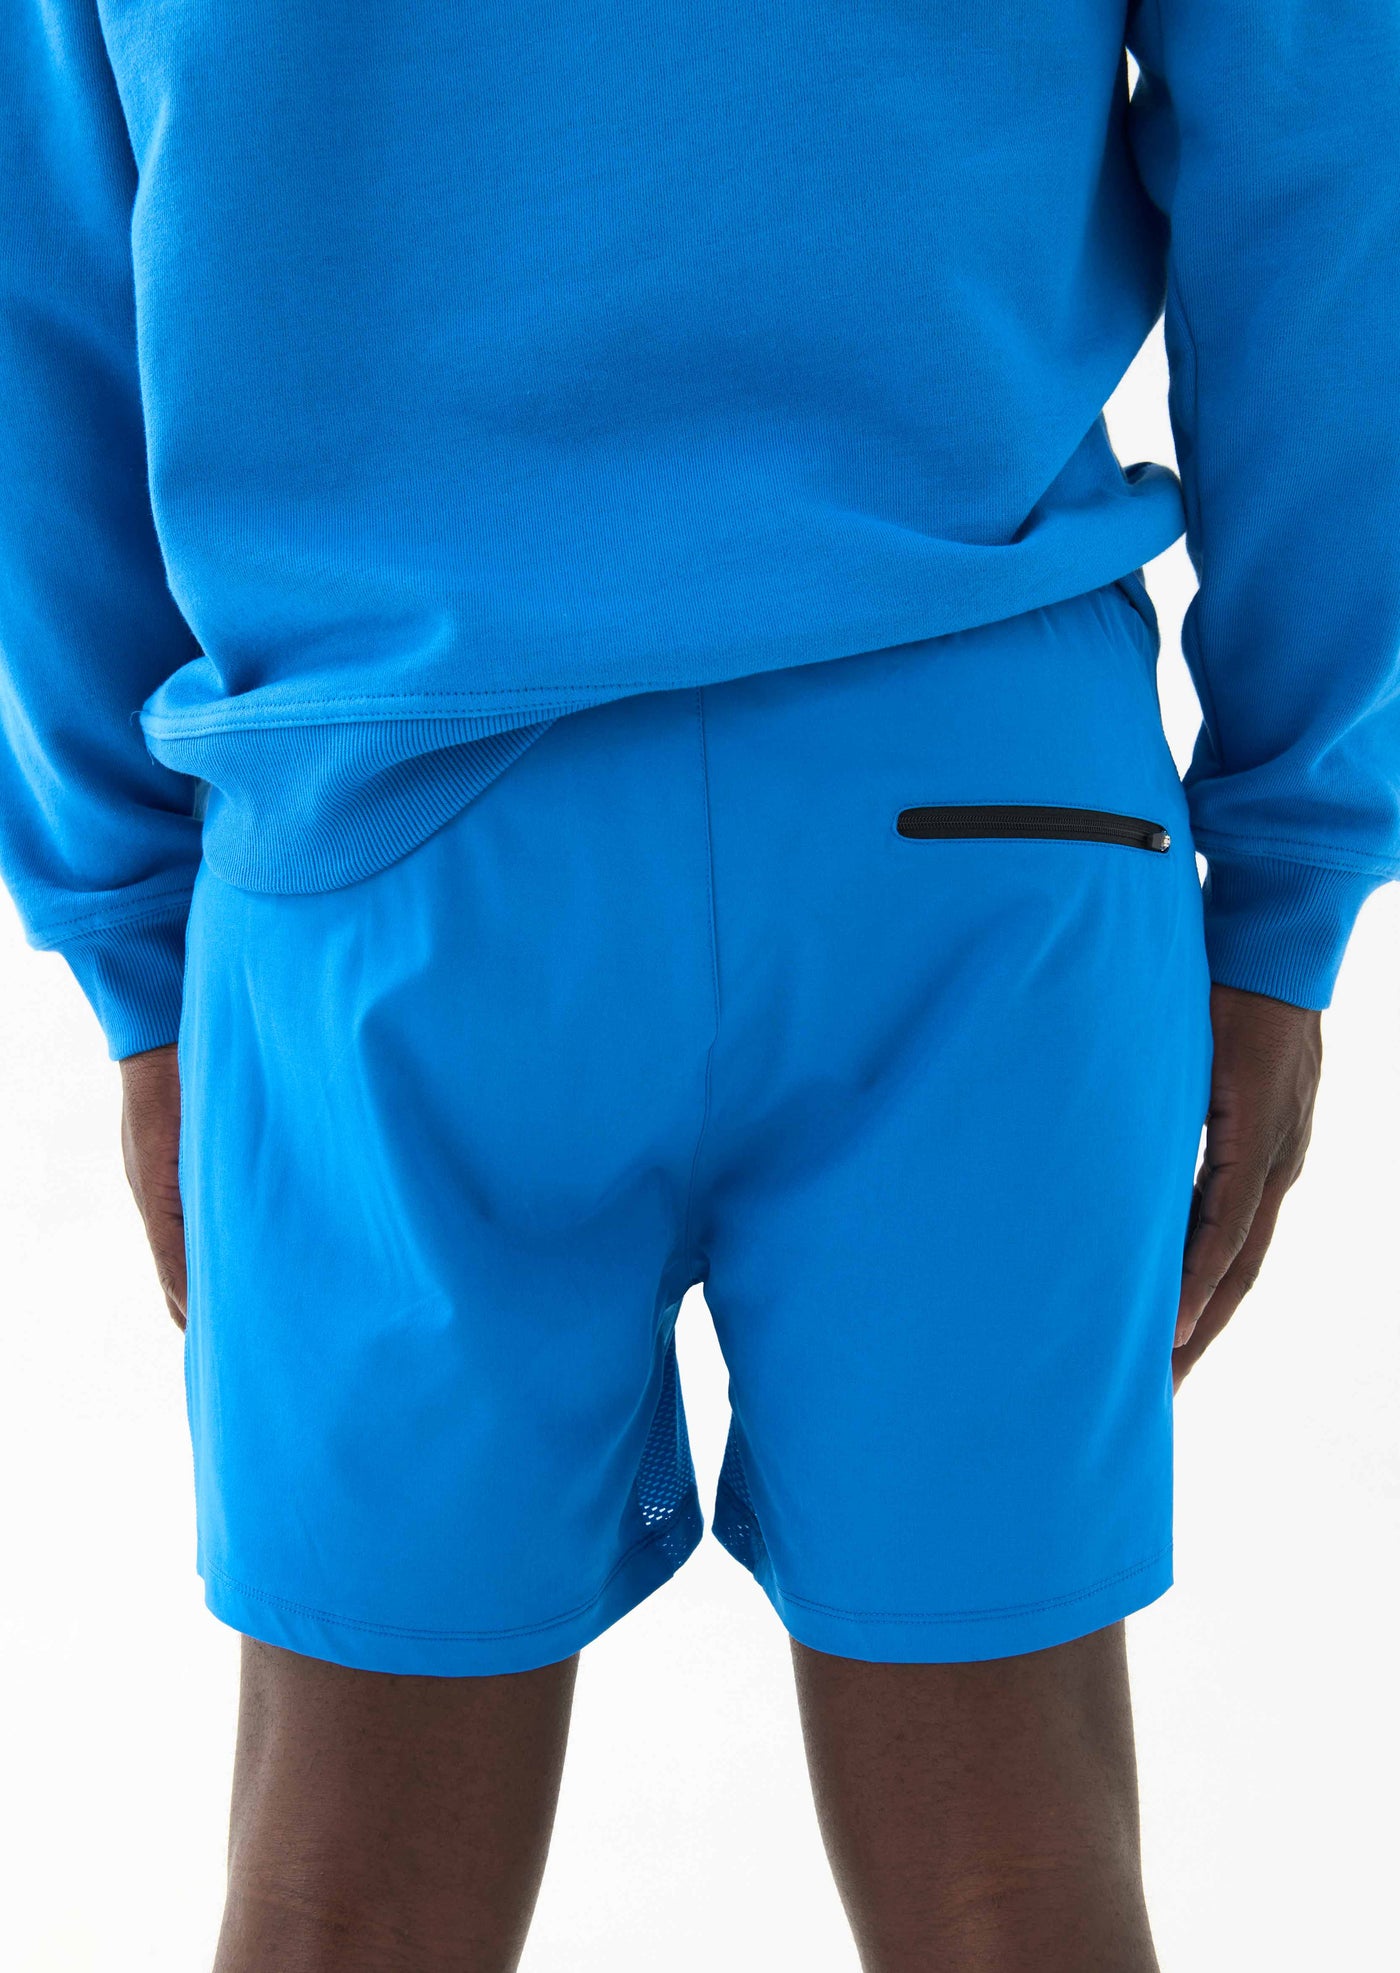 INTERVAL SHORT IN ELECTRIC BLUE